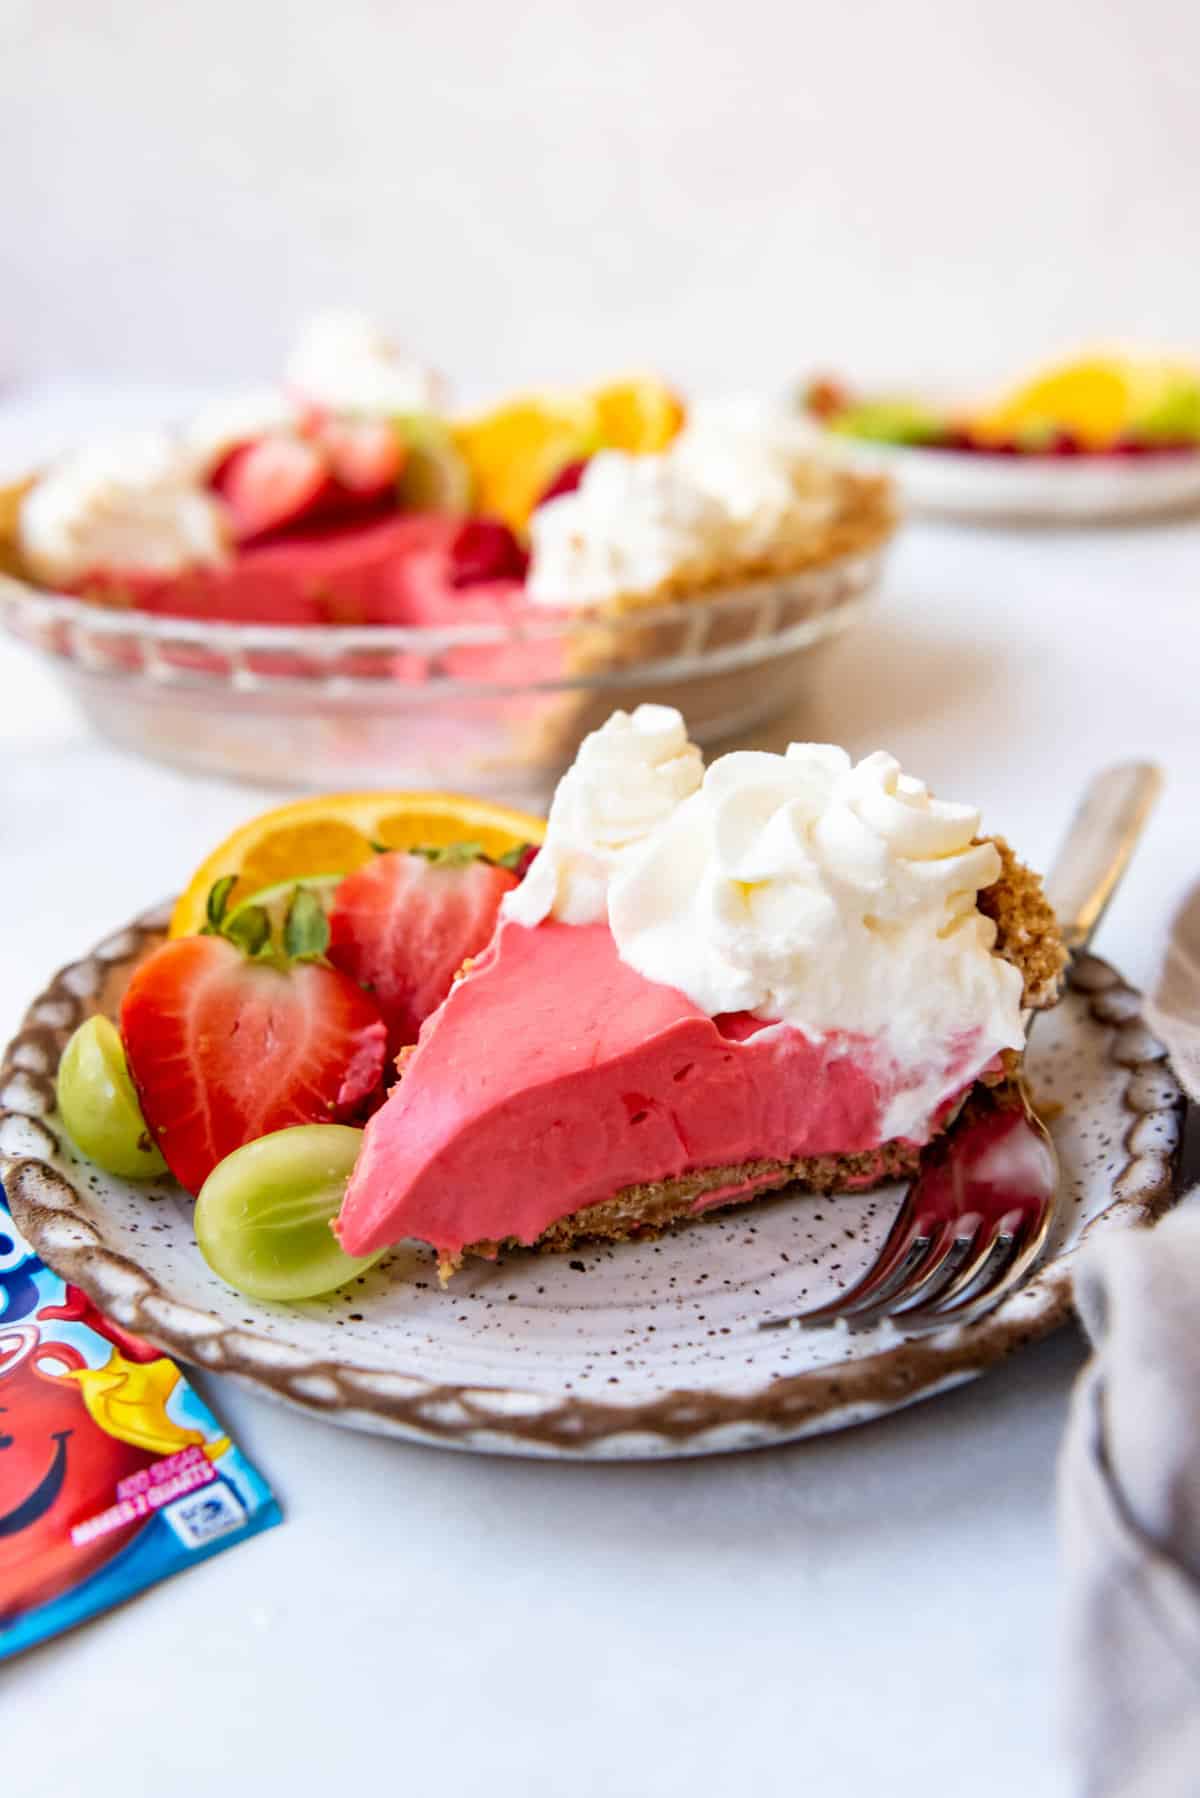 A slice of Kool-Aid pie on a plate with fresh fruit.